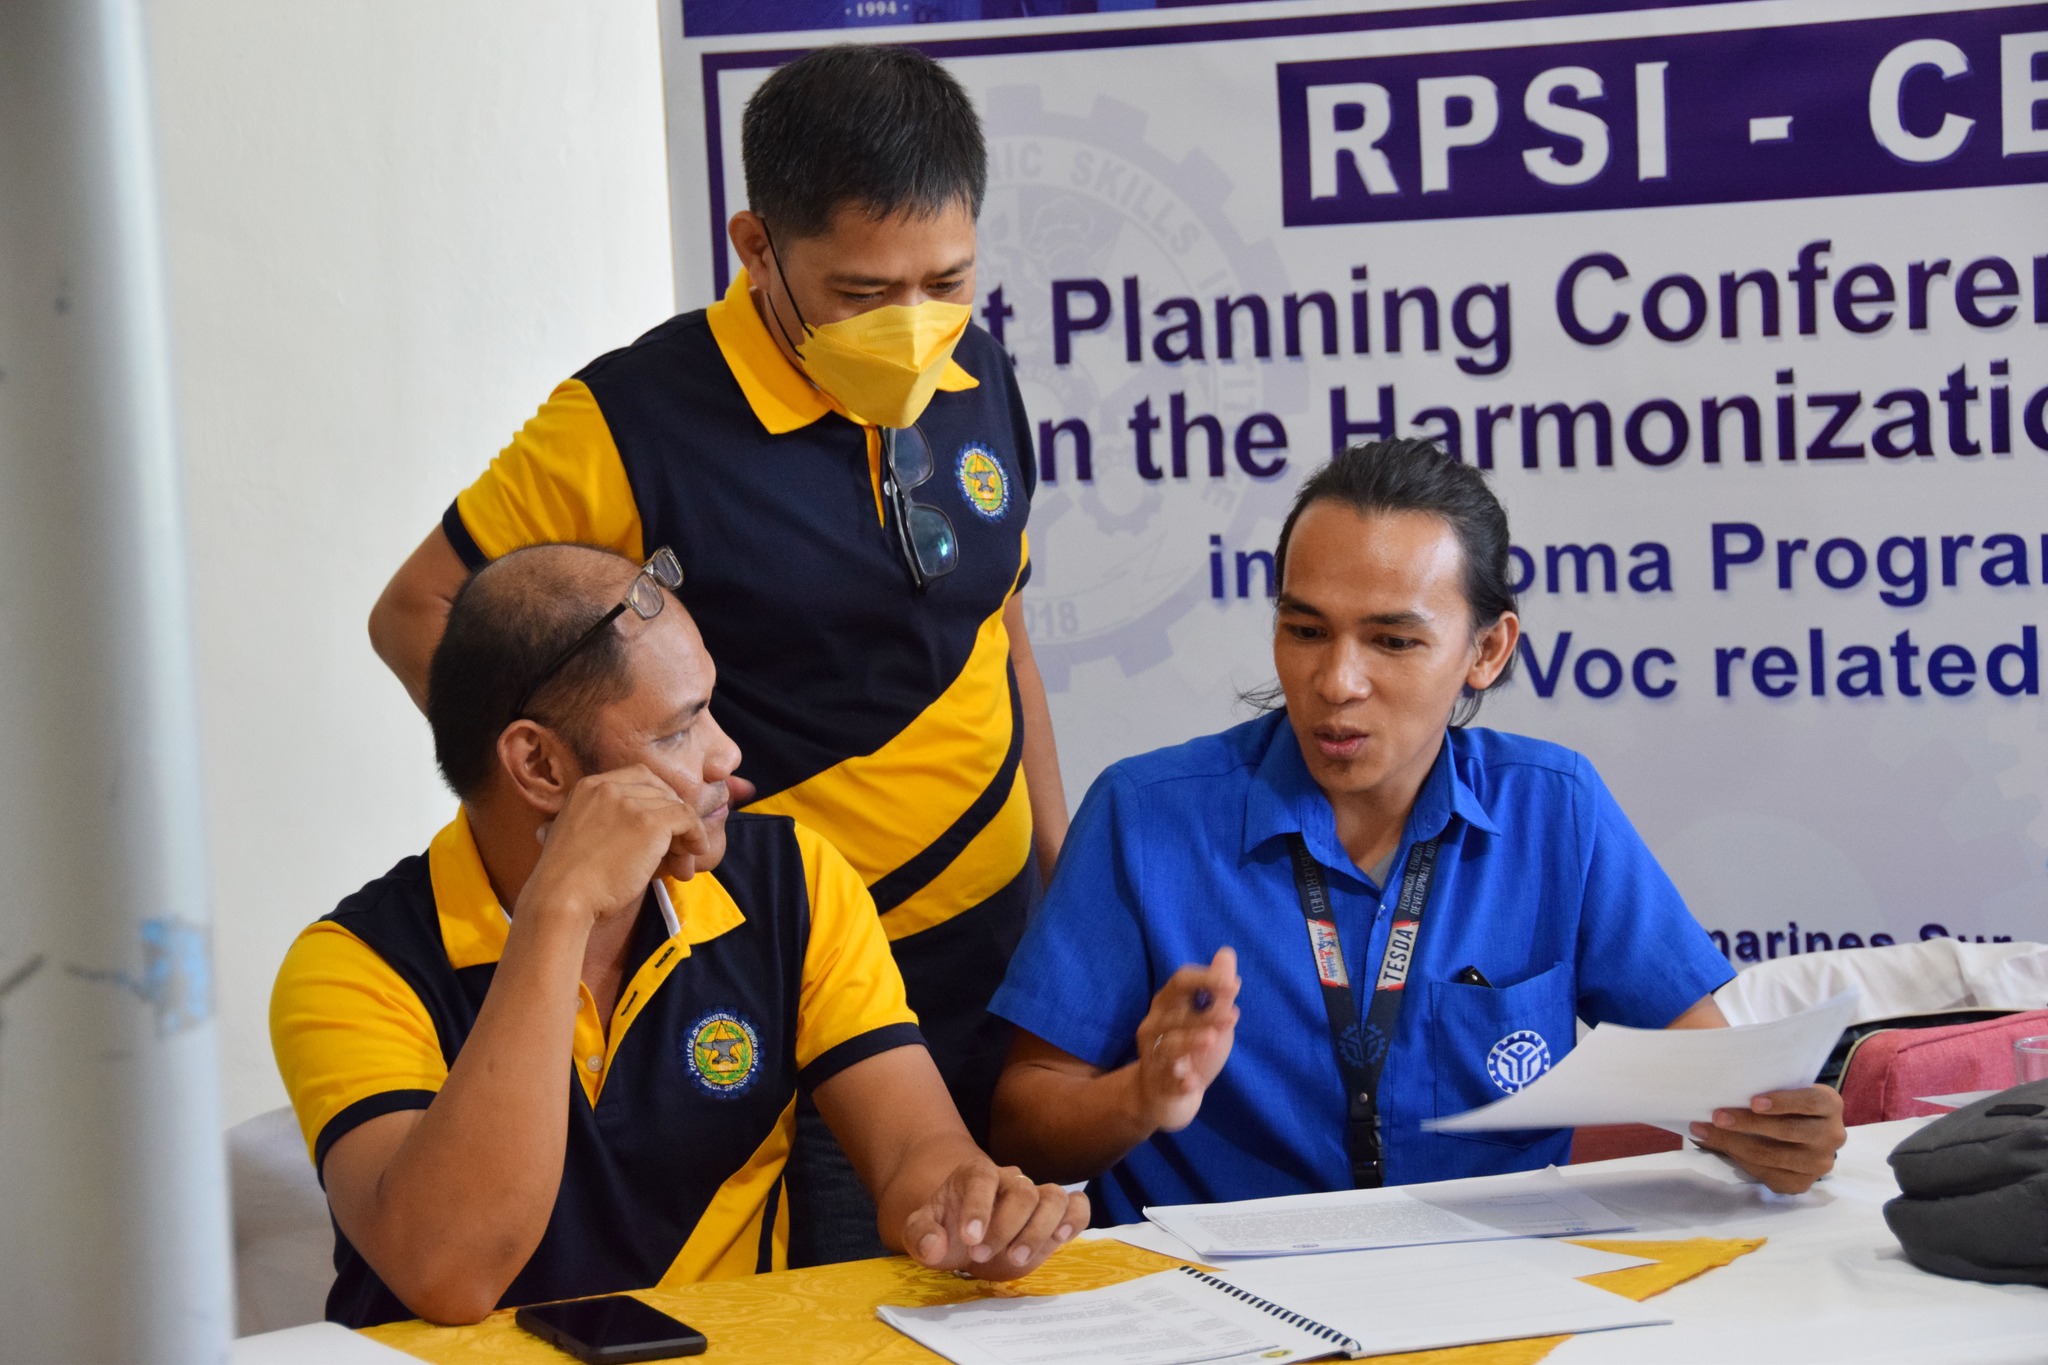 CBSUA-SIPOCOT, RPSI CONDUCT JOINT PLANNING CONFERENCE AND WORKSHOP